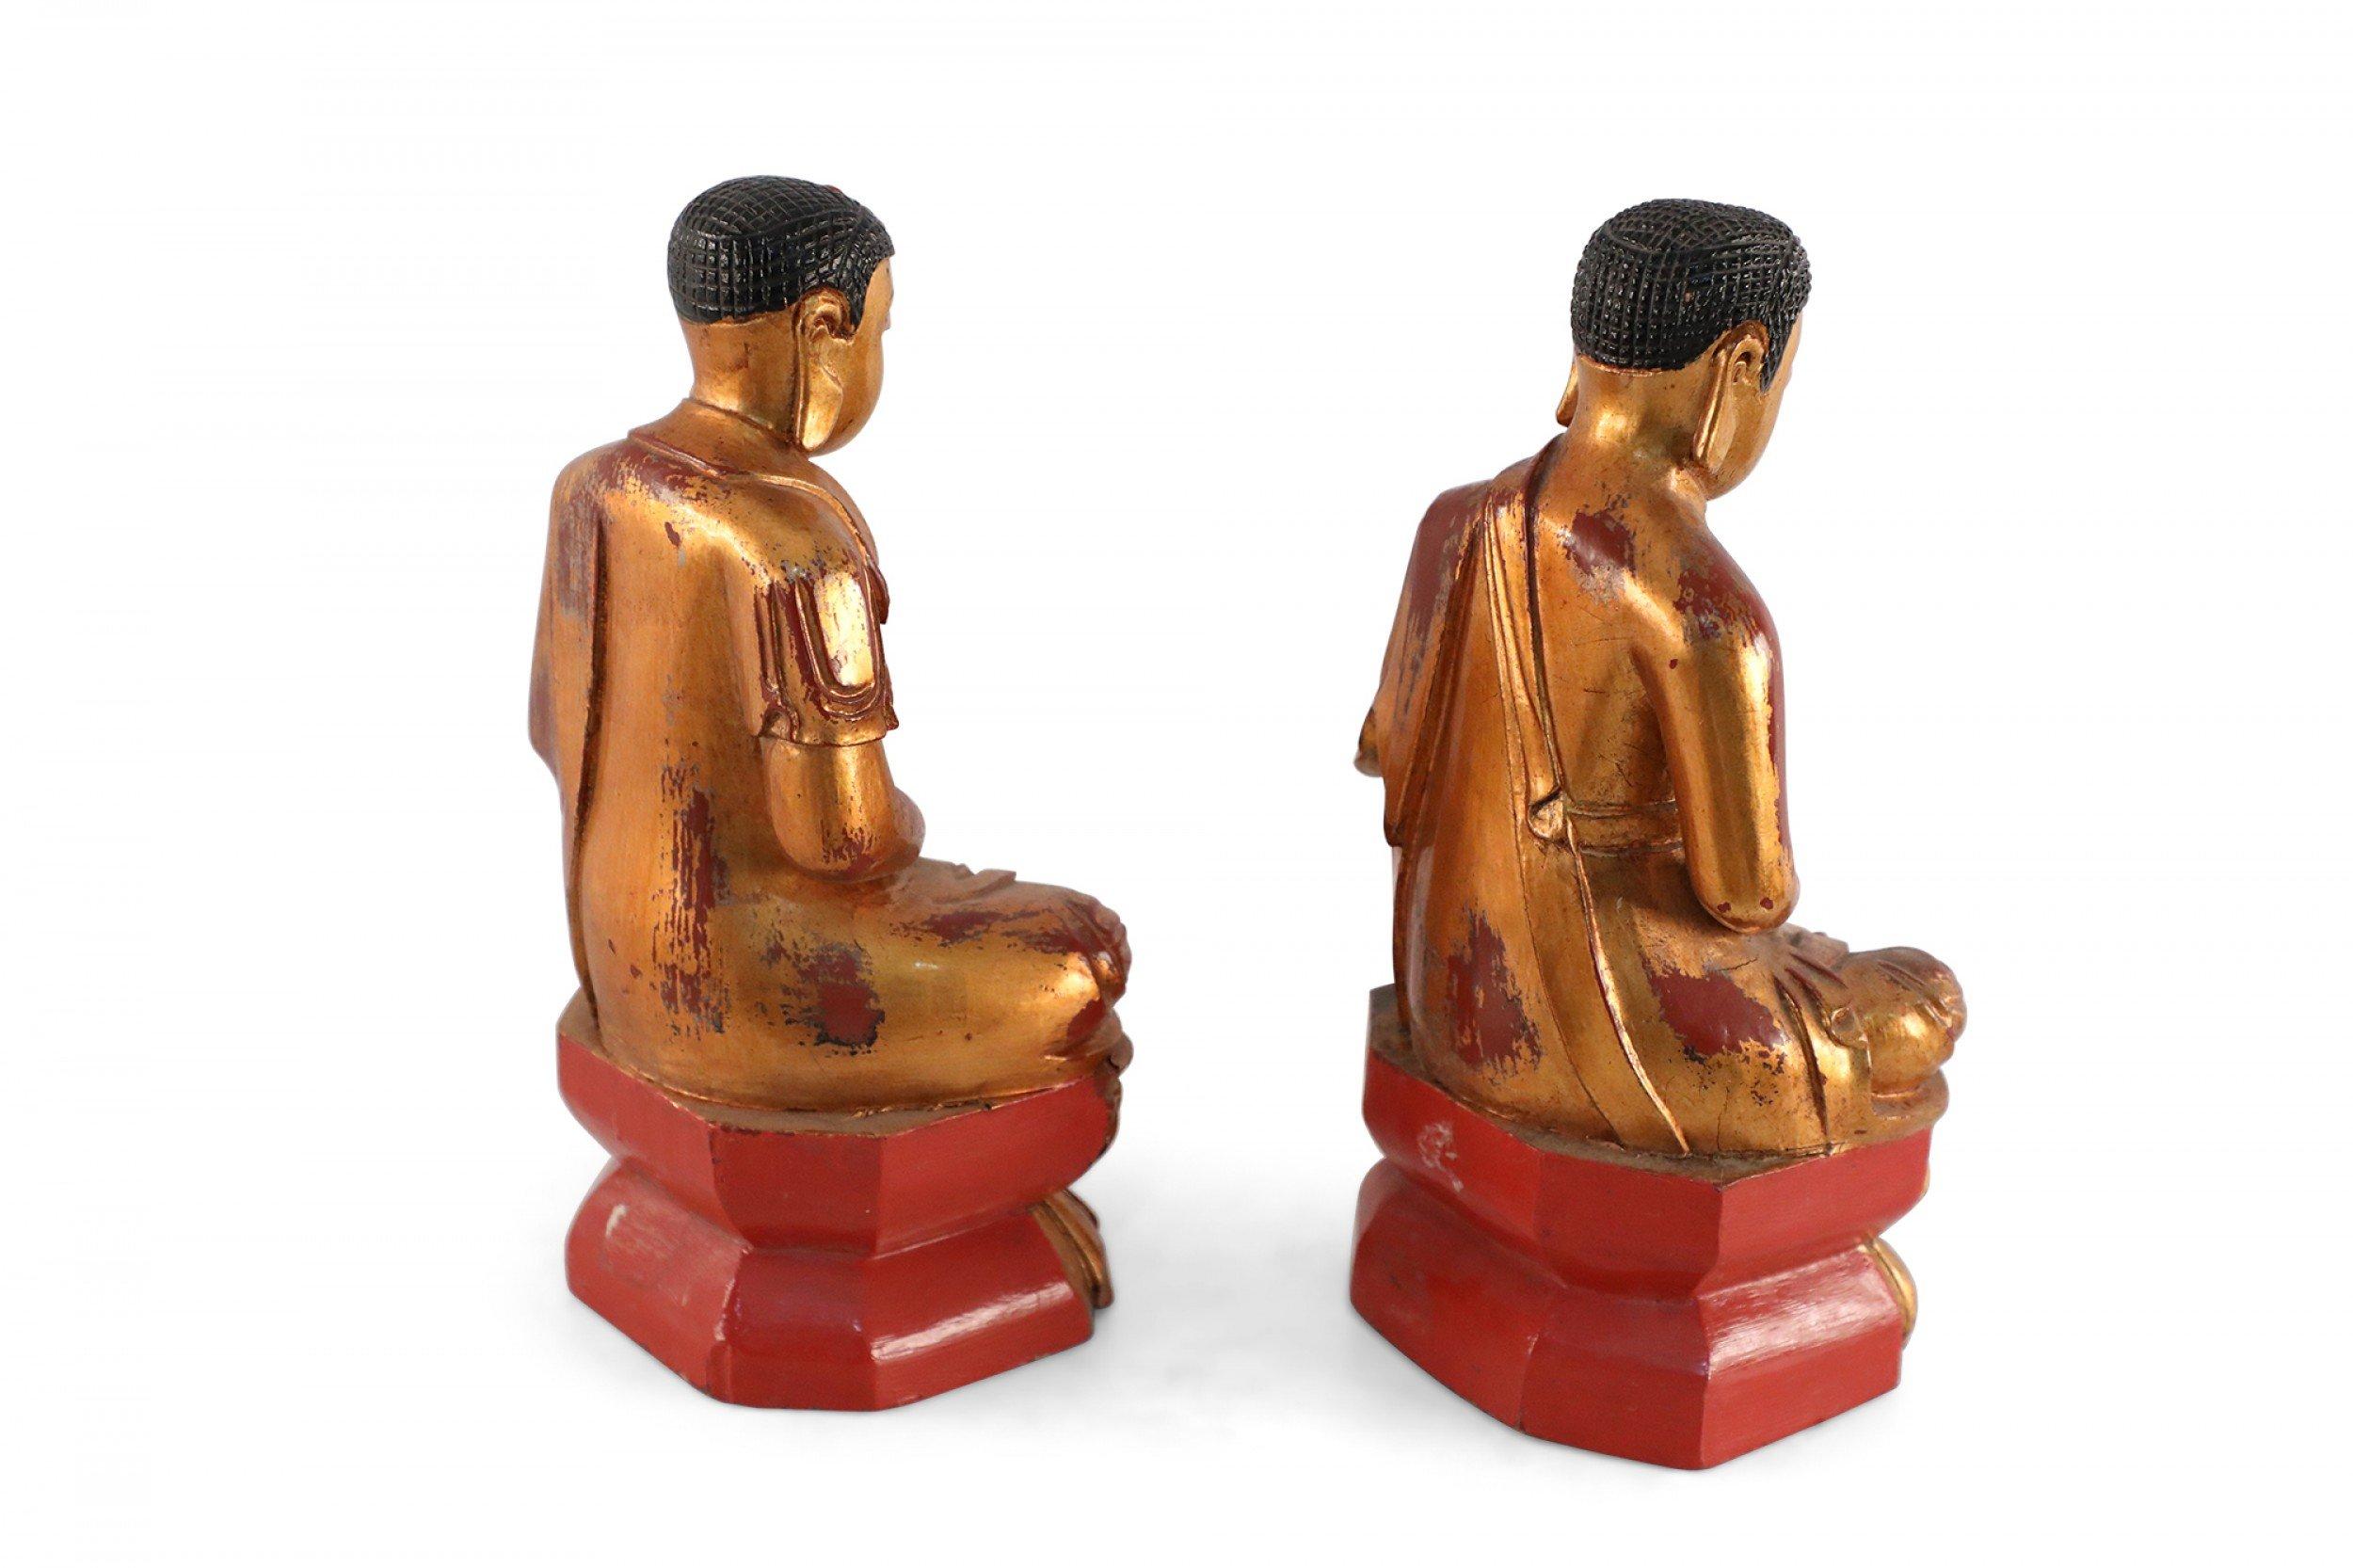 Pair of Chinese gold, carved wooden Buddha figures seated atop floral and red platform bases (PRICED AS PAIR).
 